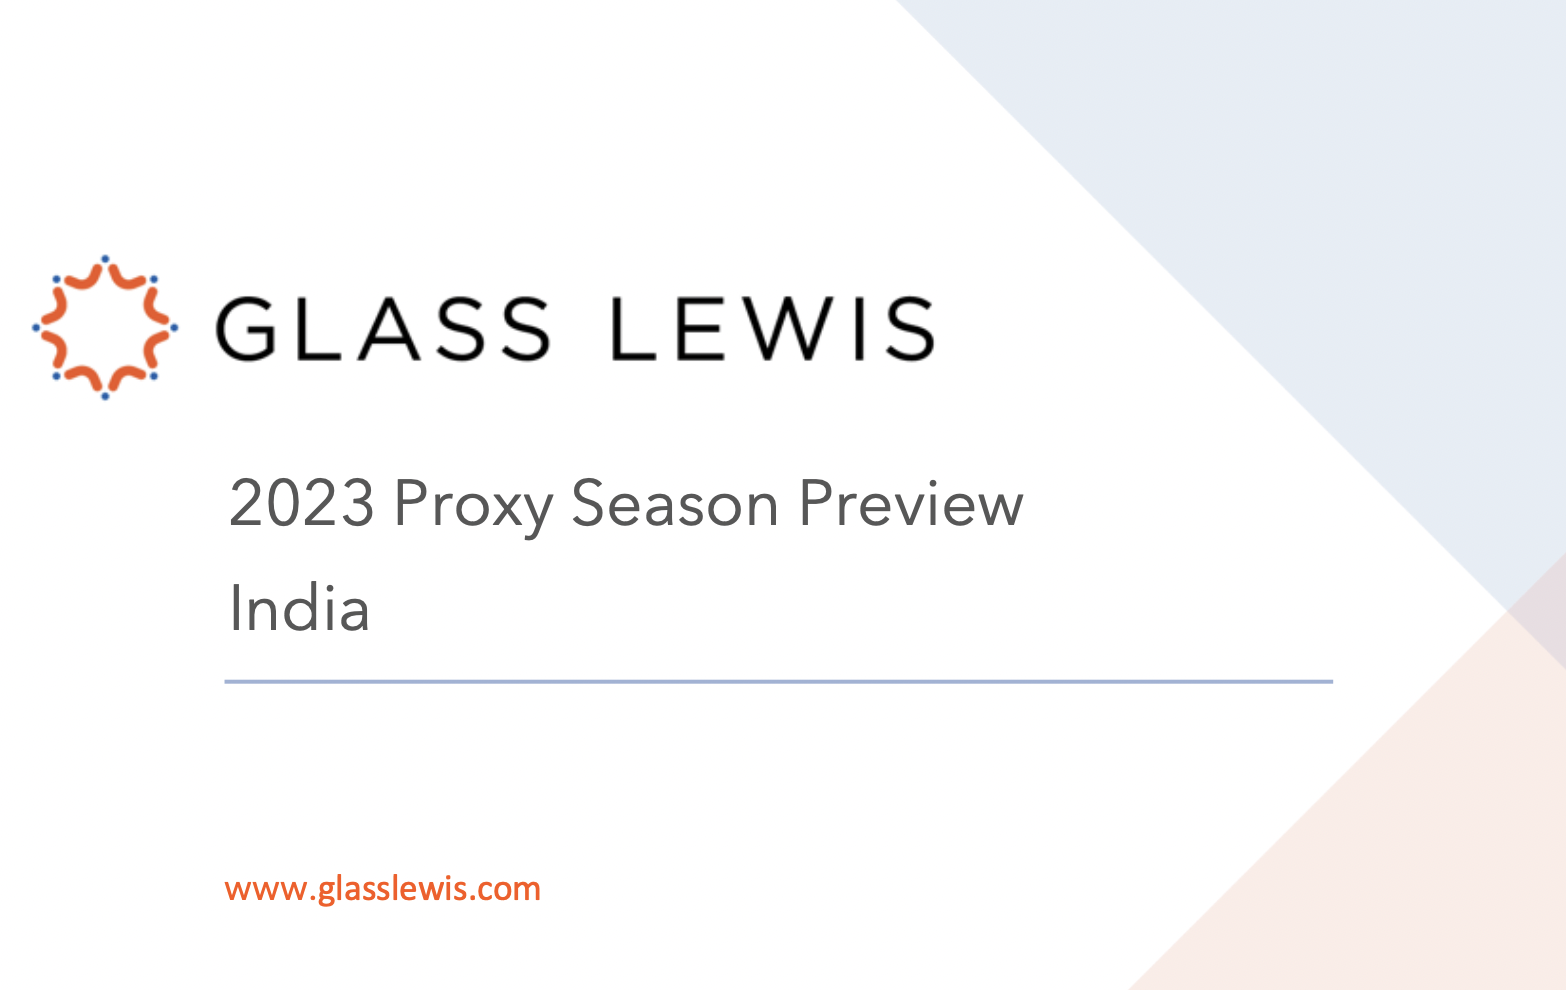 India Proxy Season 2023 Preview & Policy Guideline Updates Glass Lewis